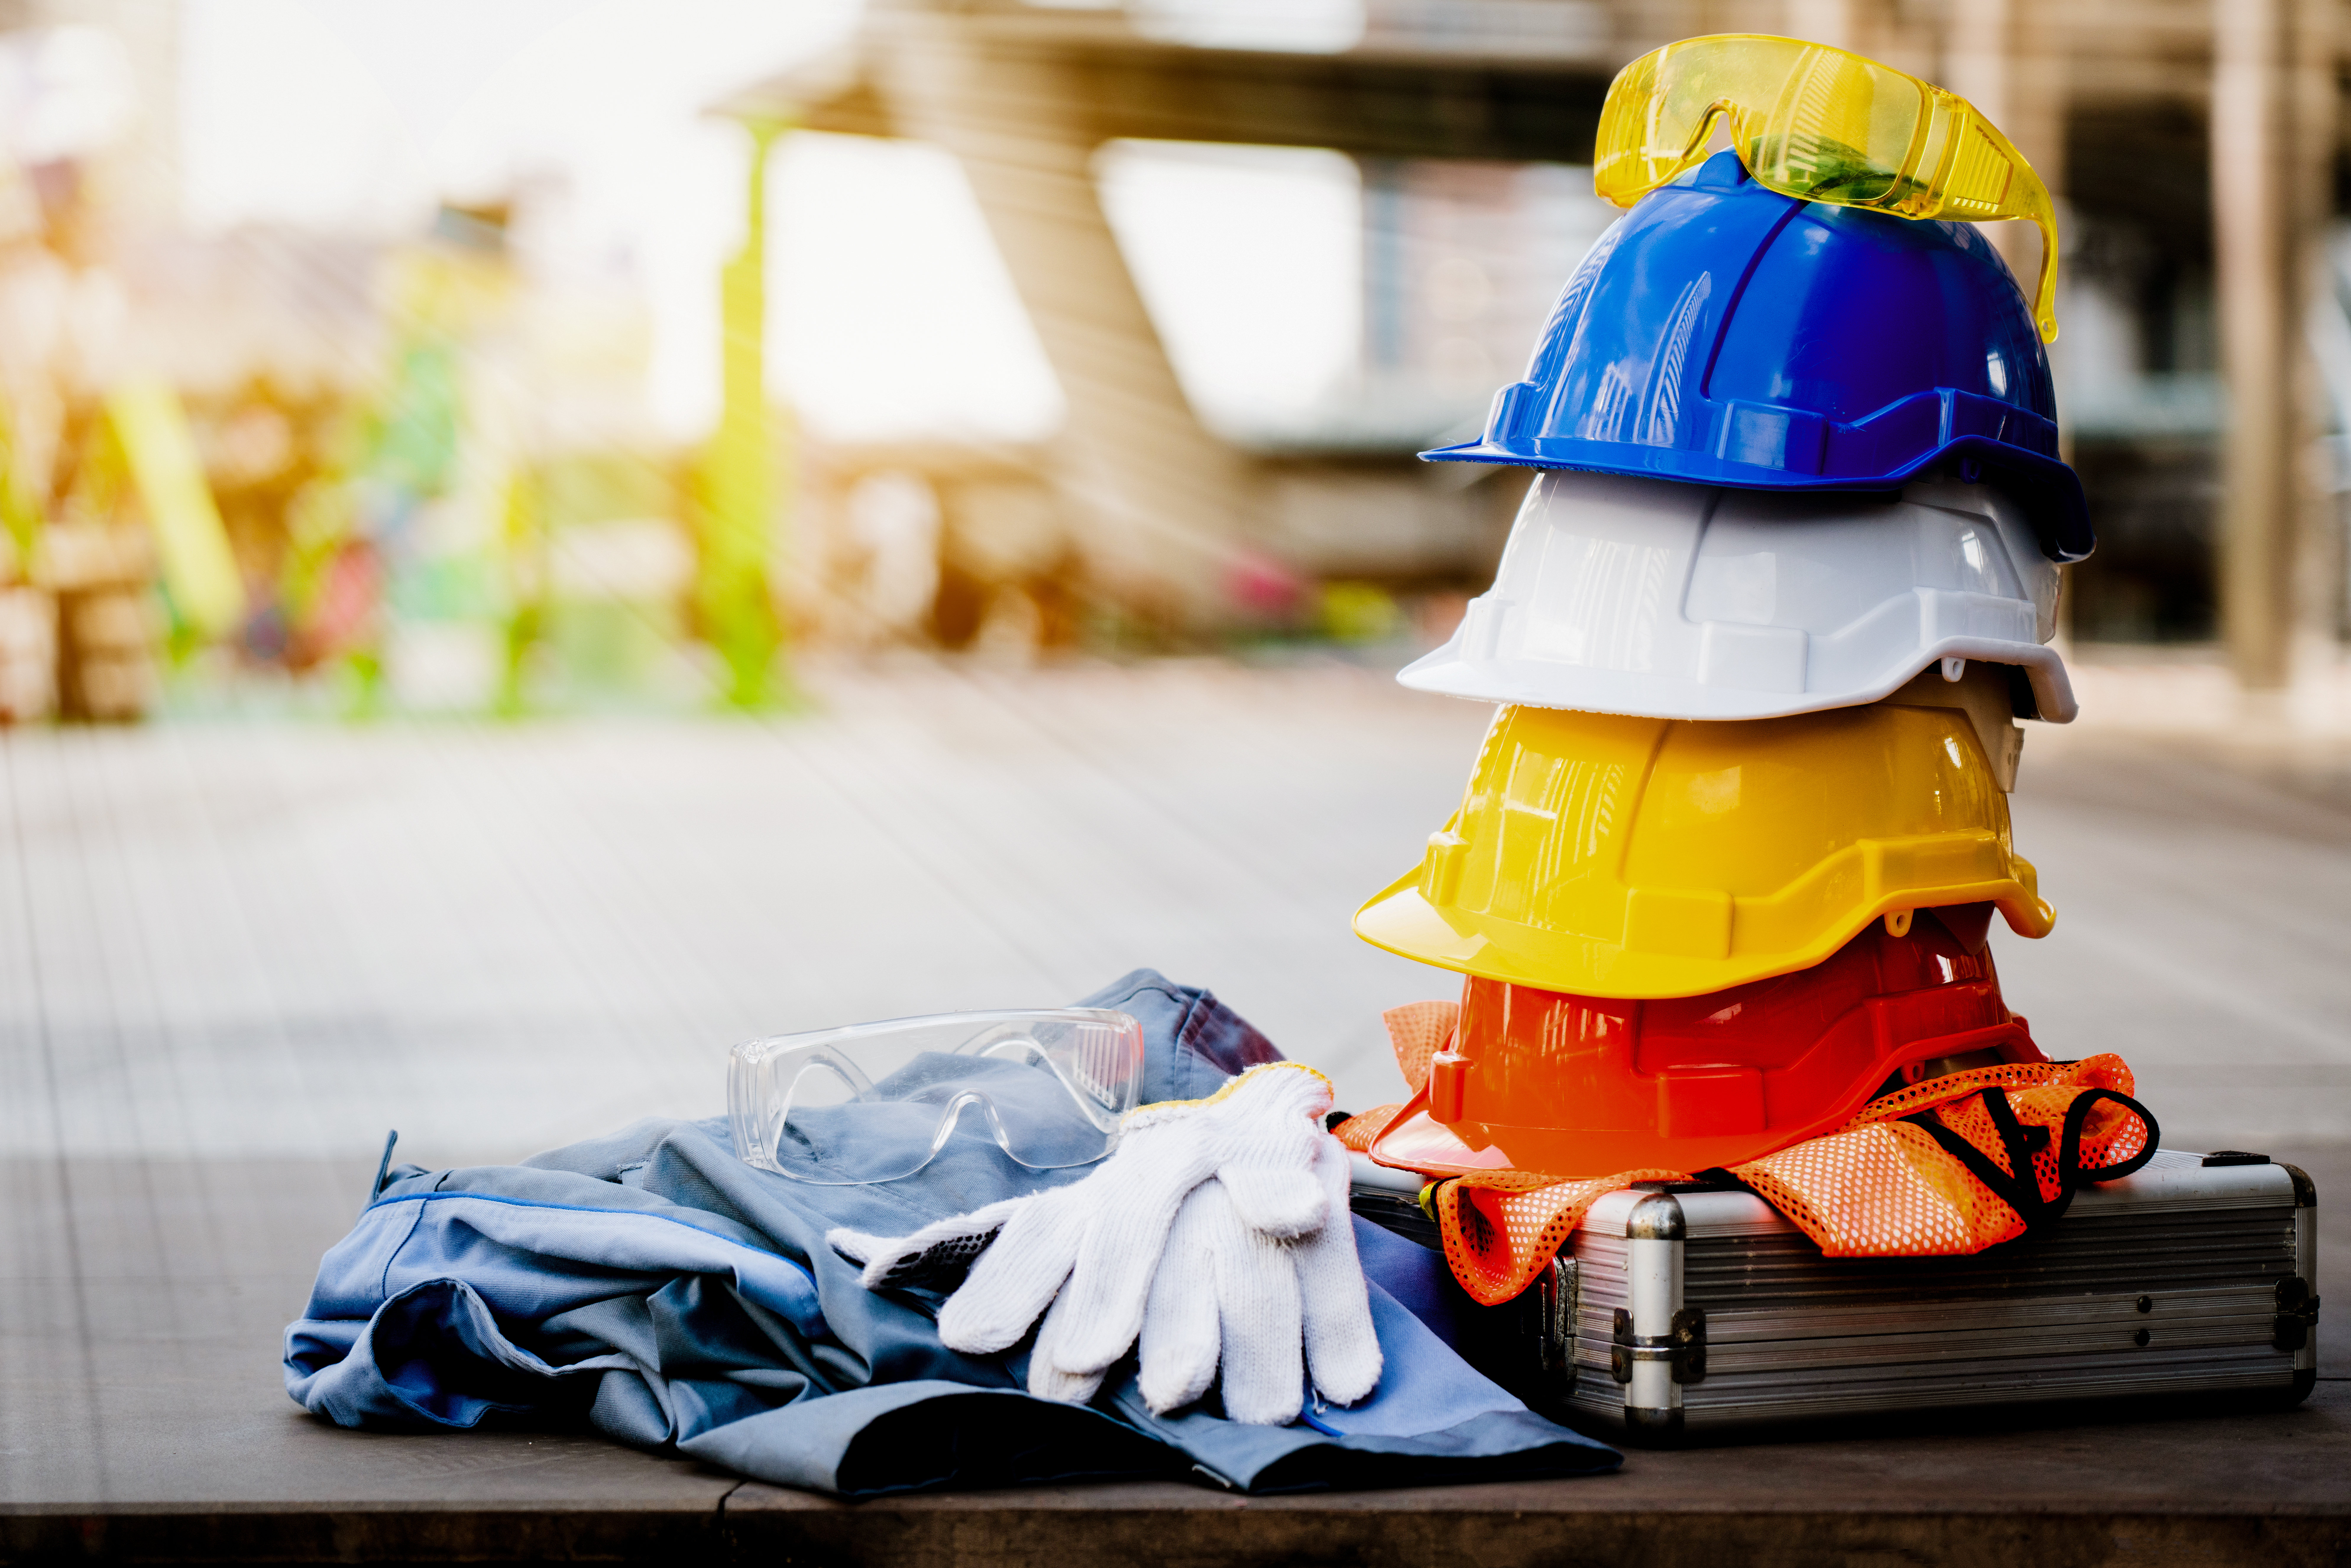 Essential Facilities Management Guidelines: 6 Ways to Improve Workplace Safety and Efficiency